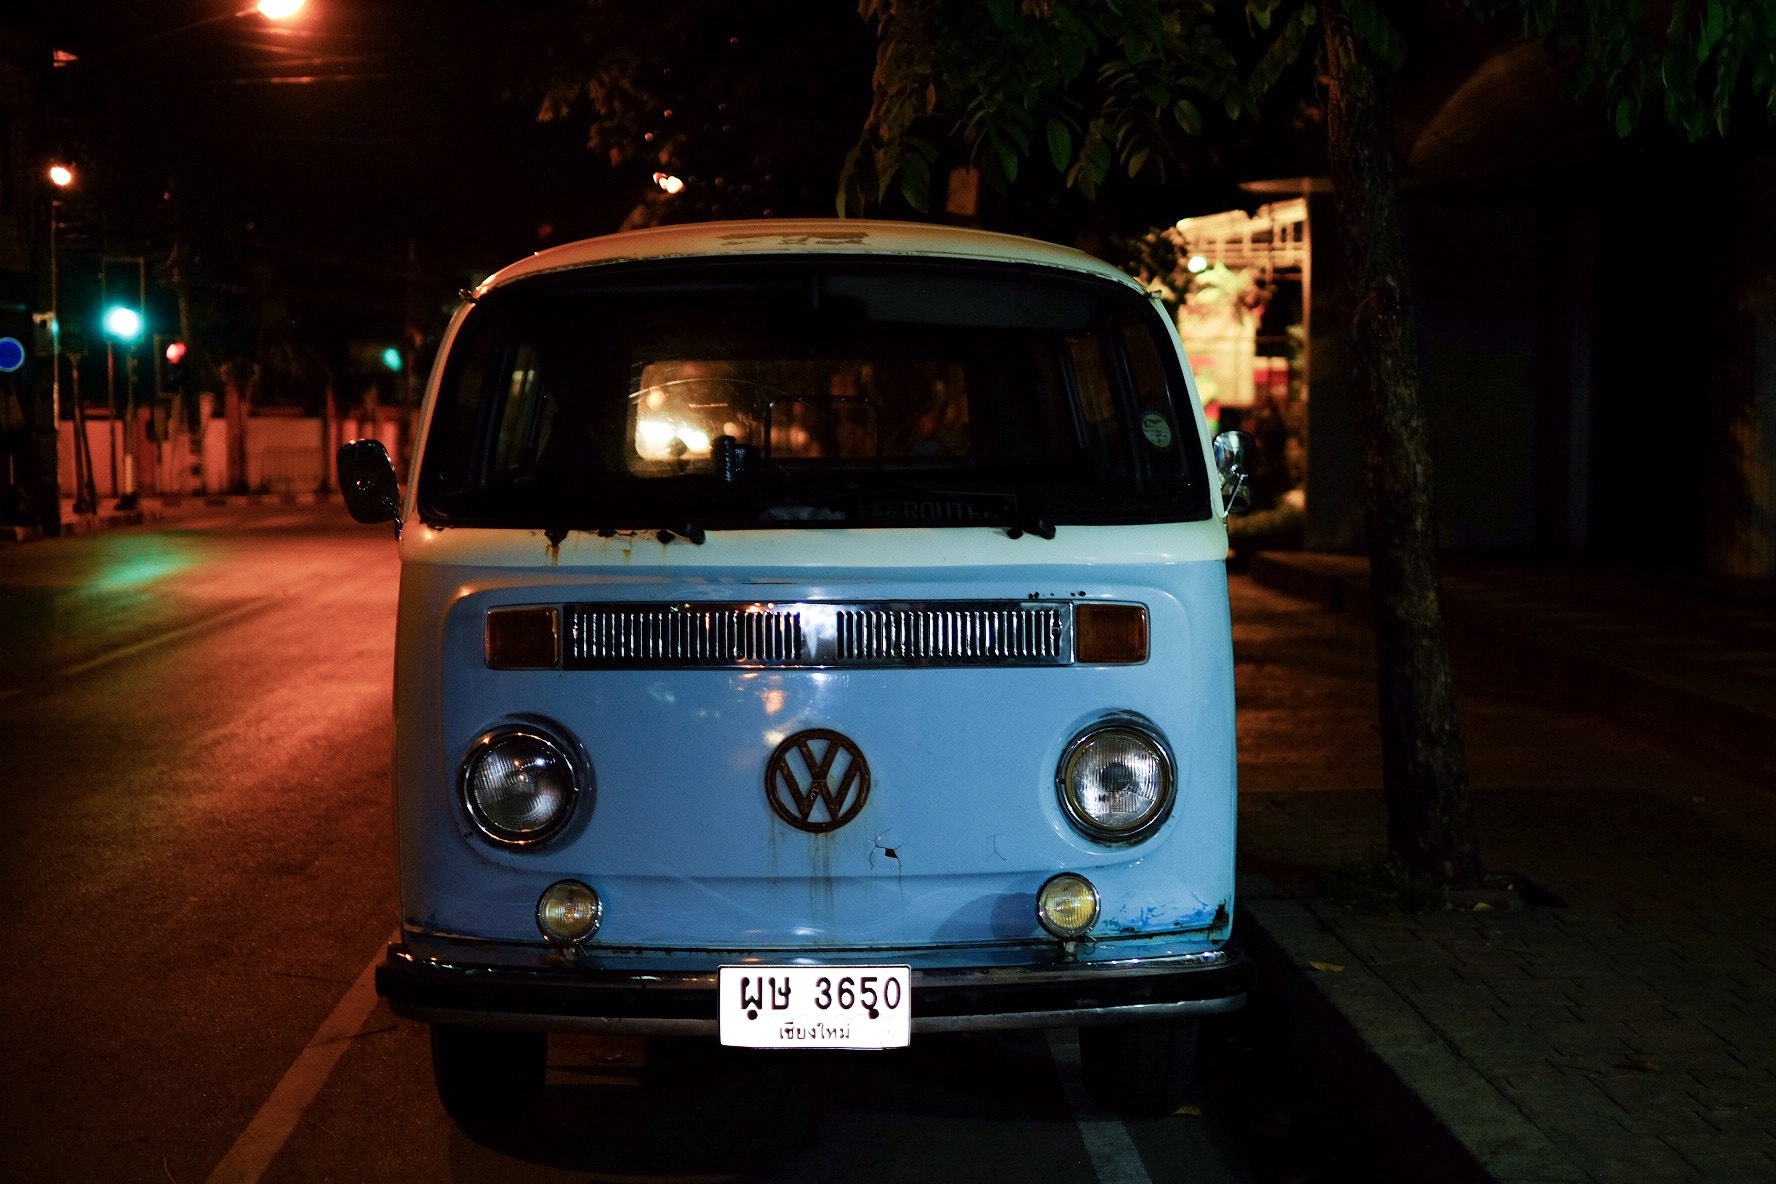 Fujifilm XF 35mm F1.4 R sample photo. We were just walking down the streets of chiang mai late at night and spotted this beauty. photography